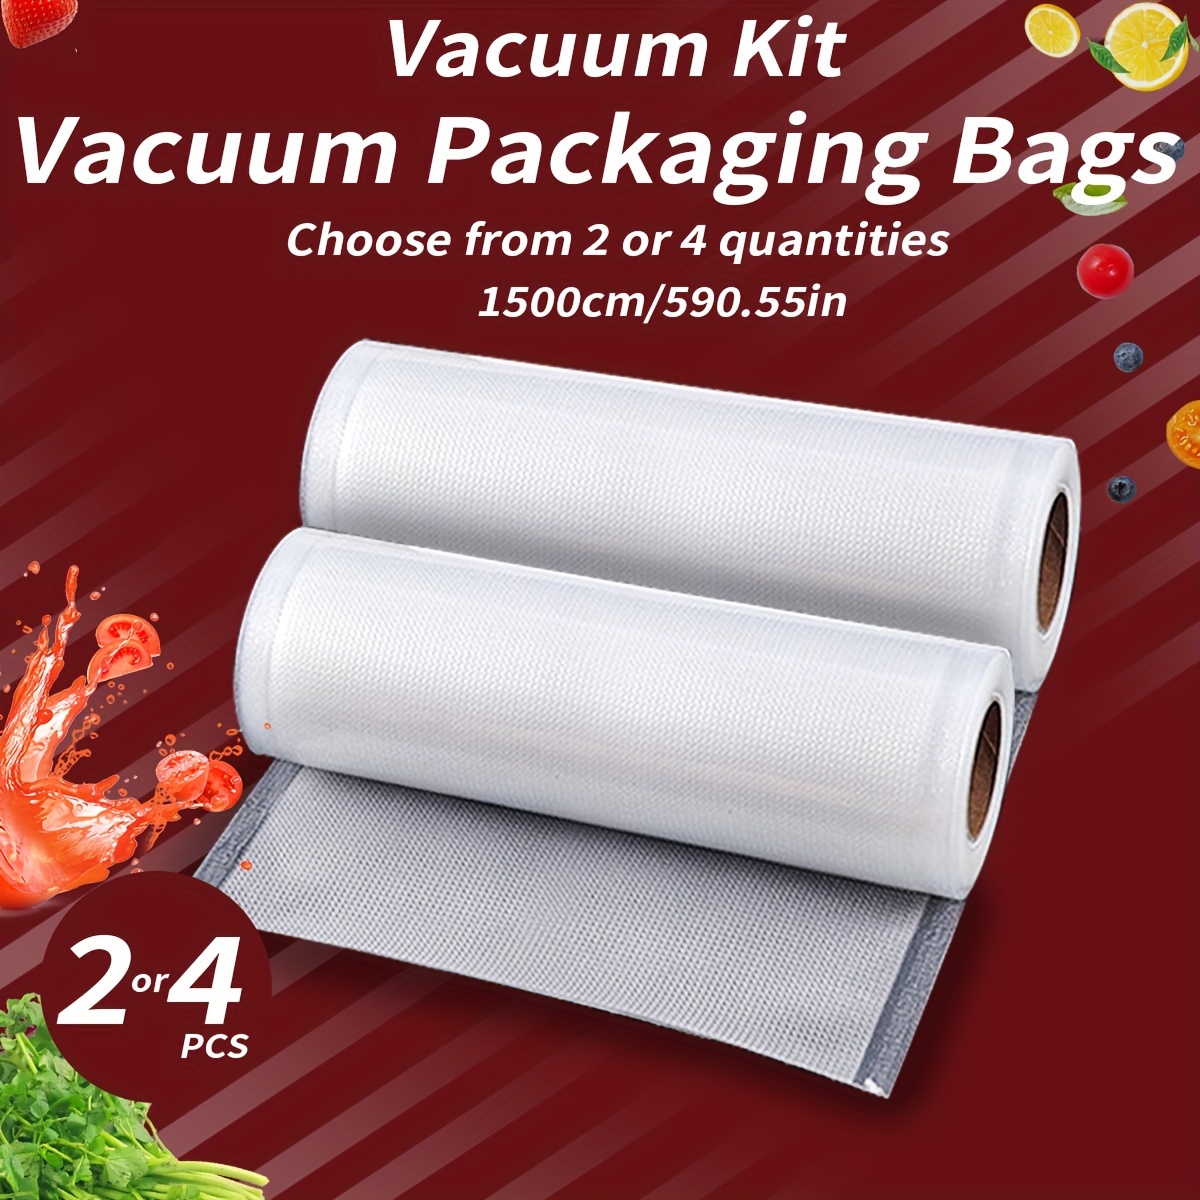 

2/4pcs Advanced Vacuum Sealed Bags For Fruits, Vegetables, And Dietary Food Saving Rolls Free Of Bisphenol A, Heavy-duty, Airtight Storage - Simplified Kitchen Vacuum Preservation Bag